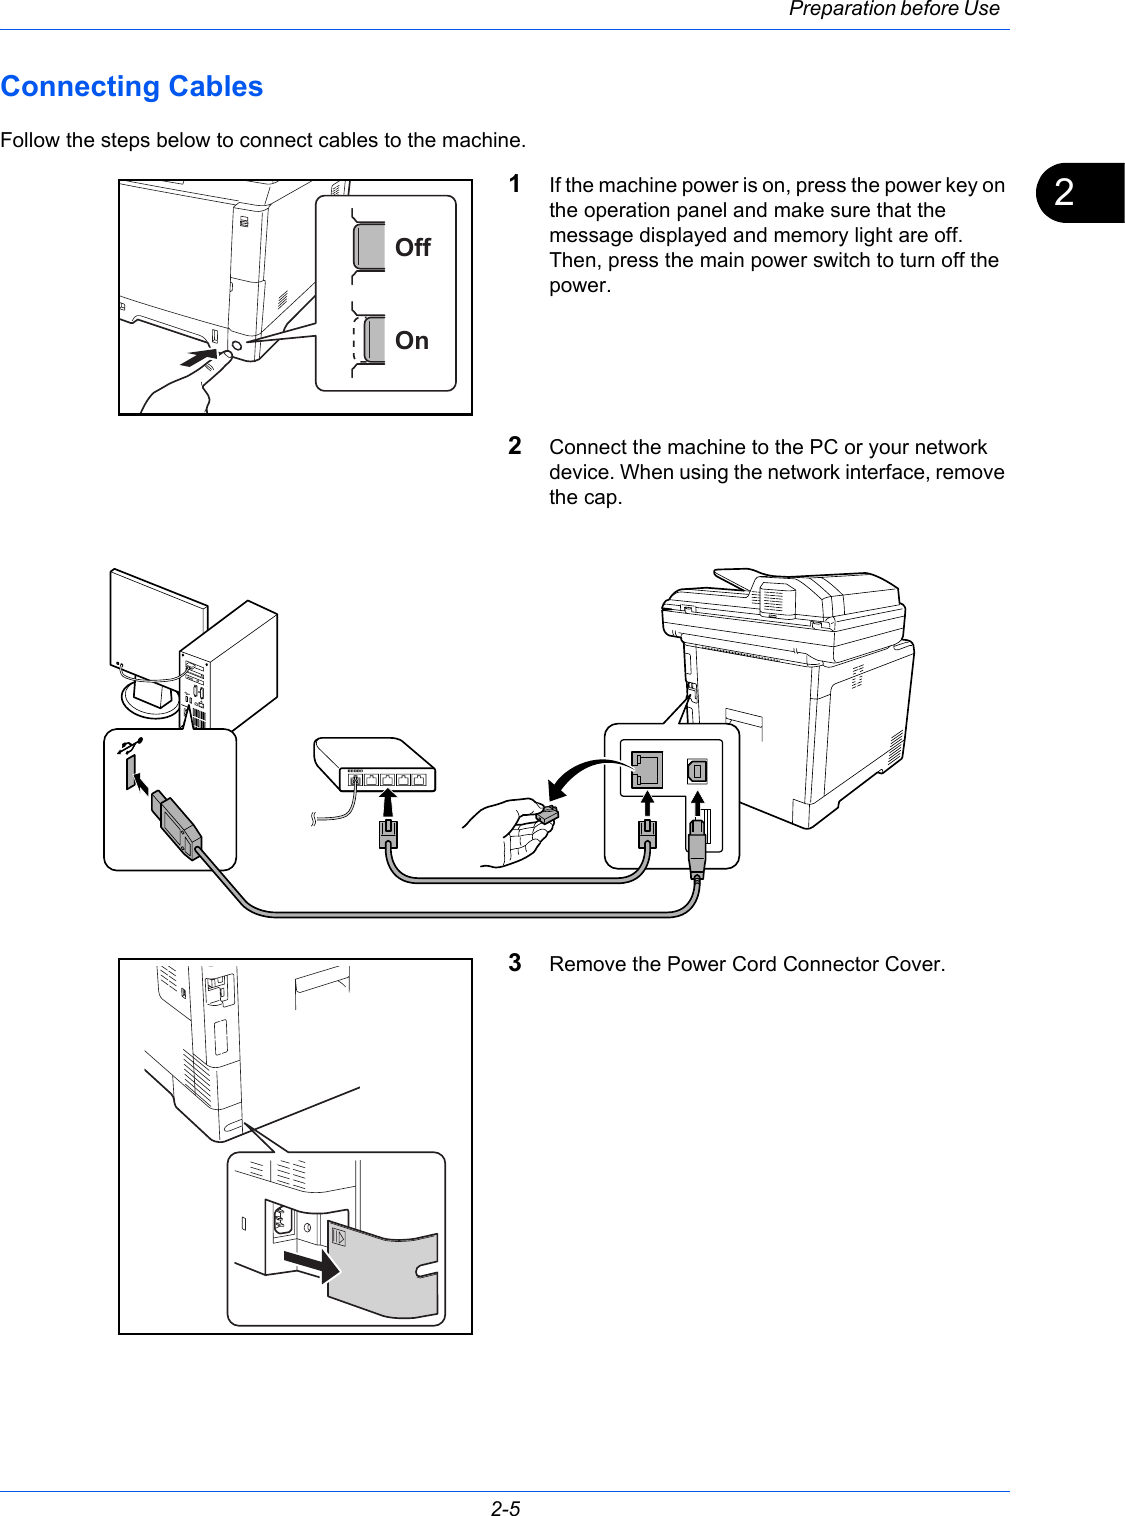 Preparation before Use 2-52Connecting Cables Follow the steps below to connect cables to the machine.1If the machine power is on, press the power key on the operation panel and make sure that the message displayed and memory light are off. Then, press the main power switch to turn off the power.2Connect the machine to the PC or your network device. When using the network interface, remove the cap.3Remove the Power Cord Connector Cover.OnOff